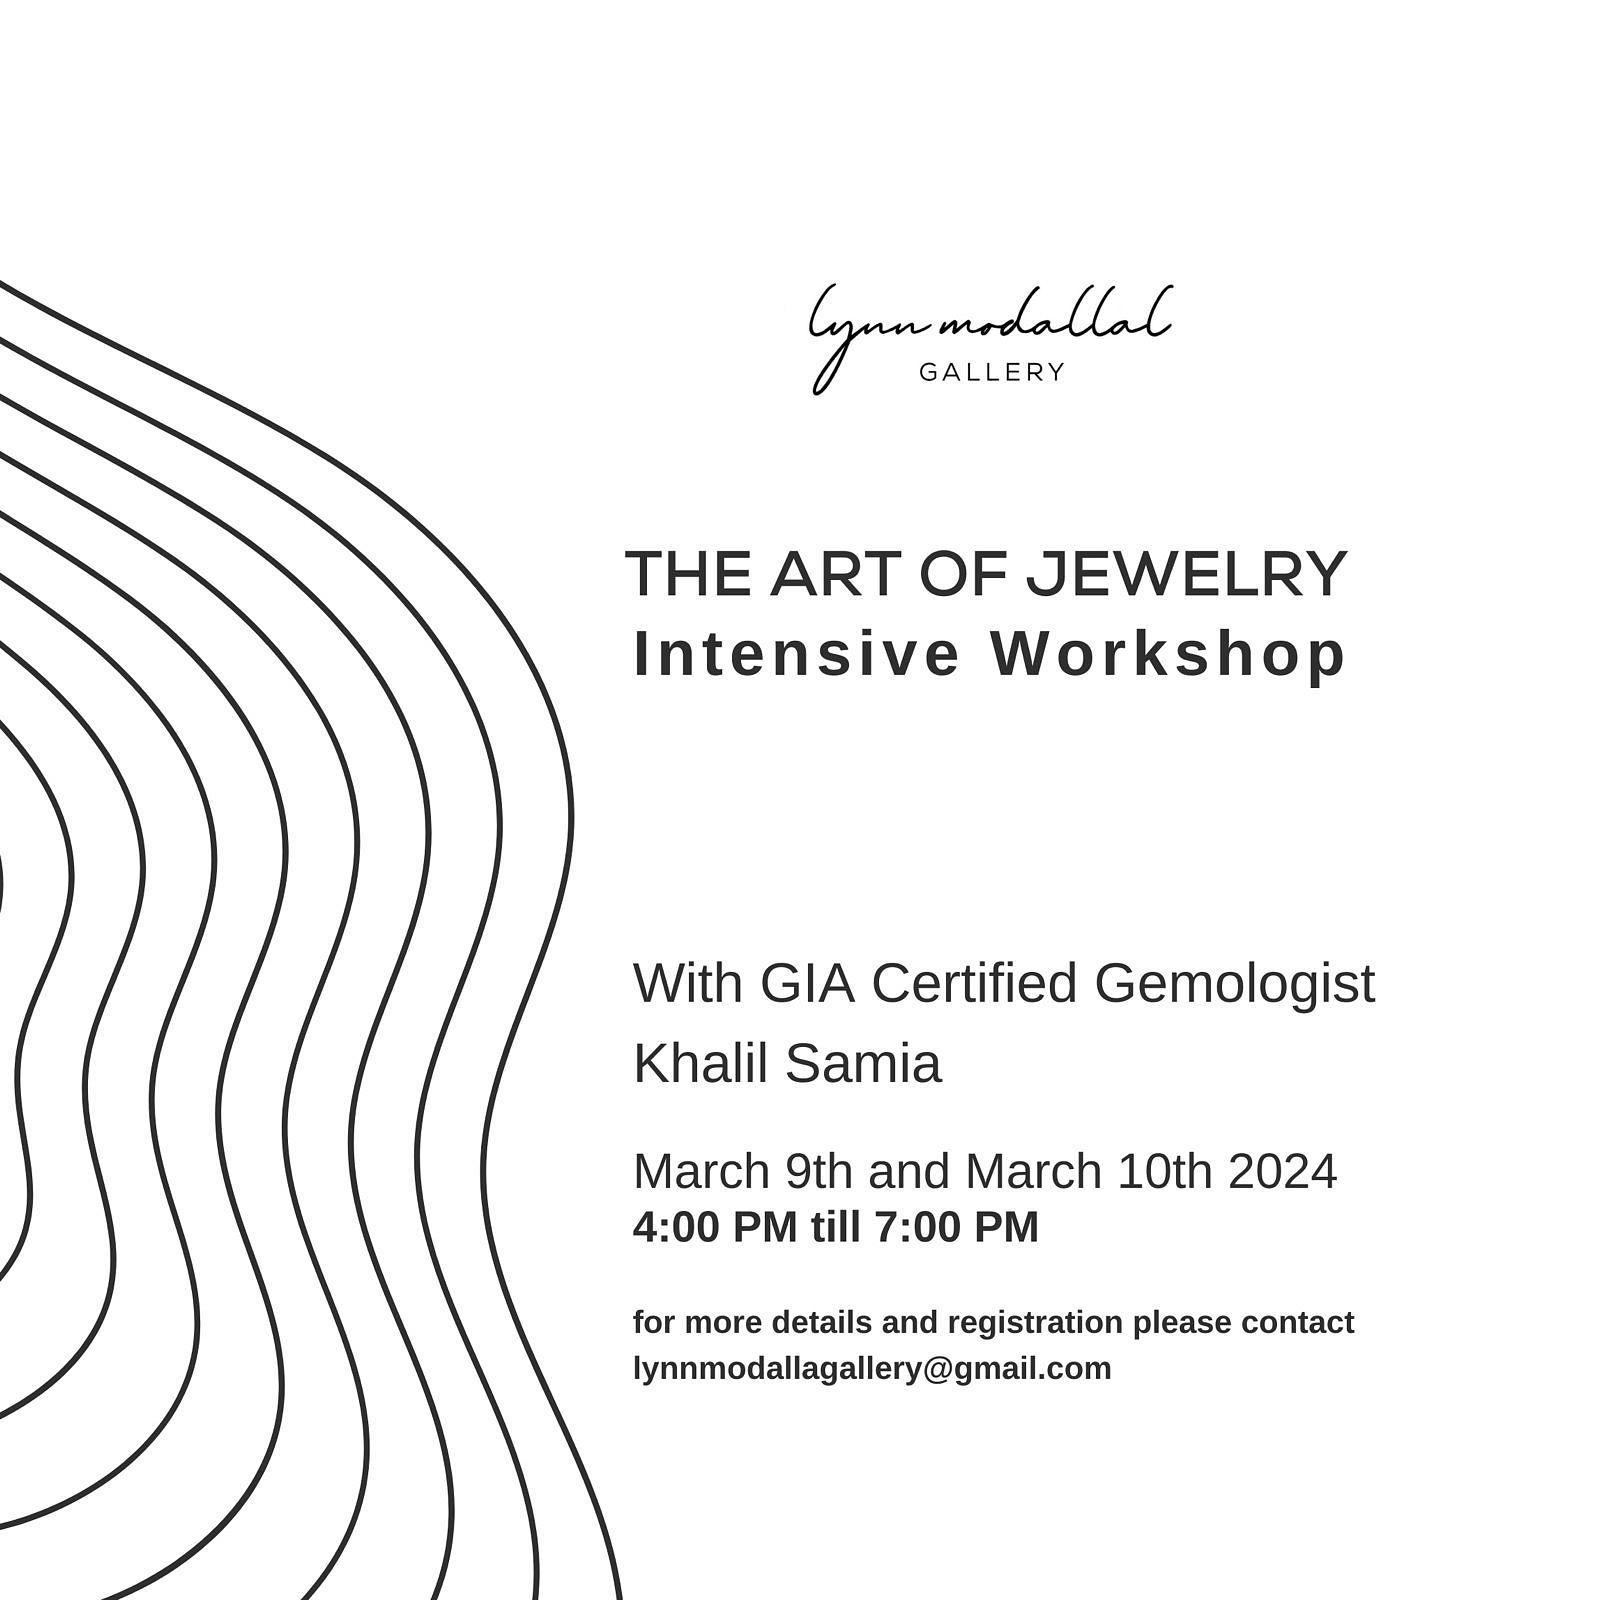 THE ART OF JEWELRY thumbnail